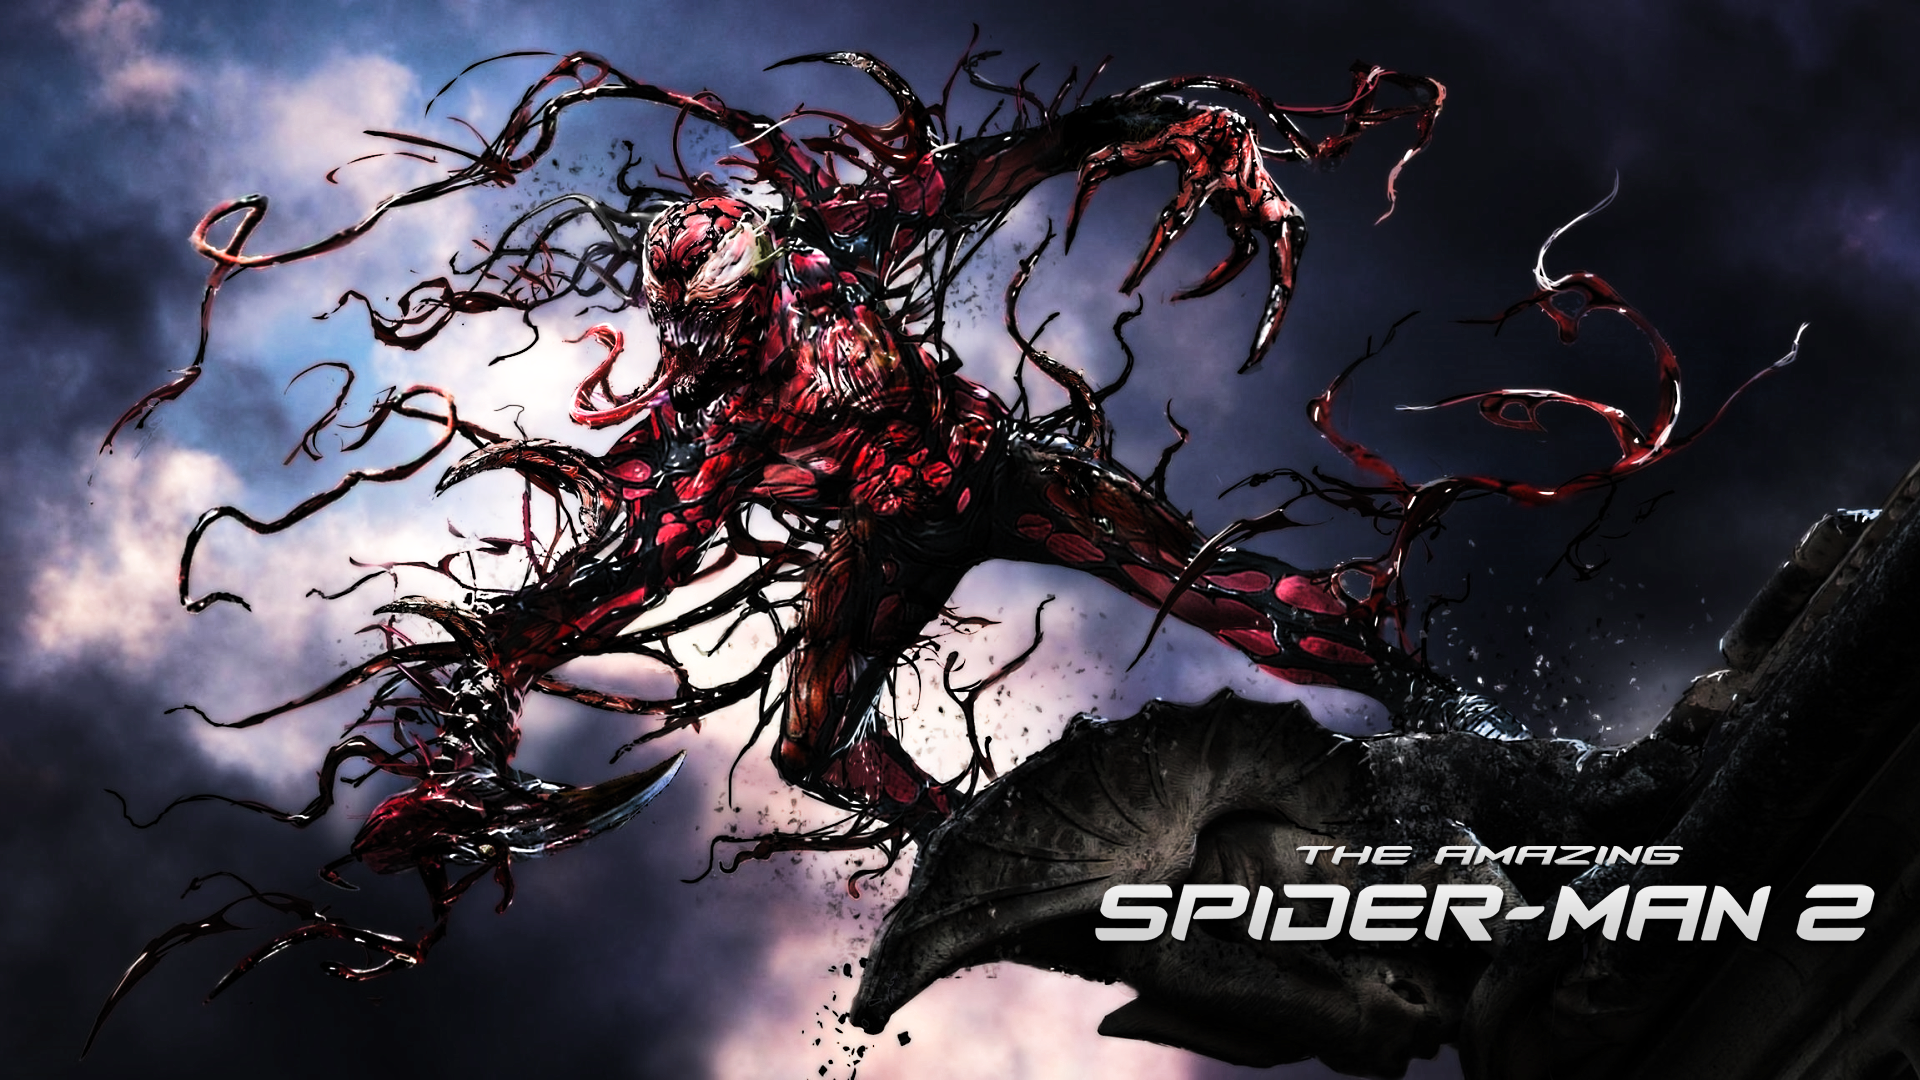 Amazing Spider-Man Carnage fan poster